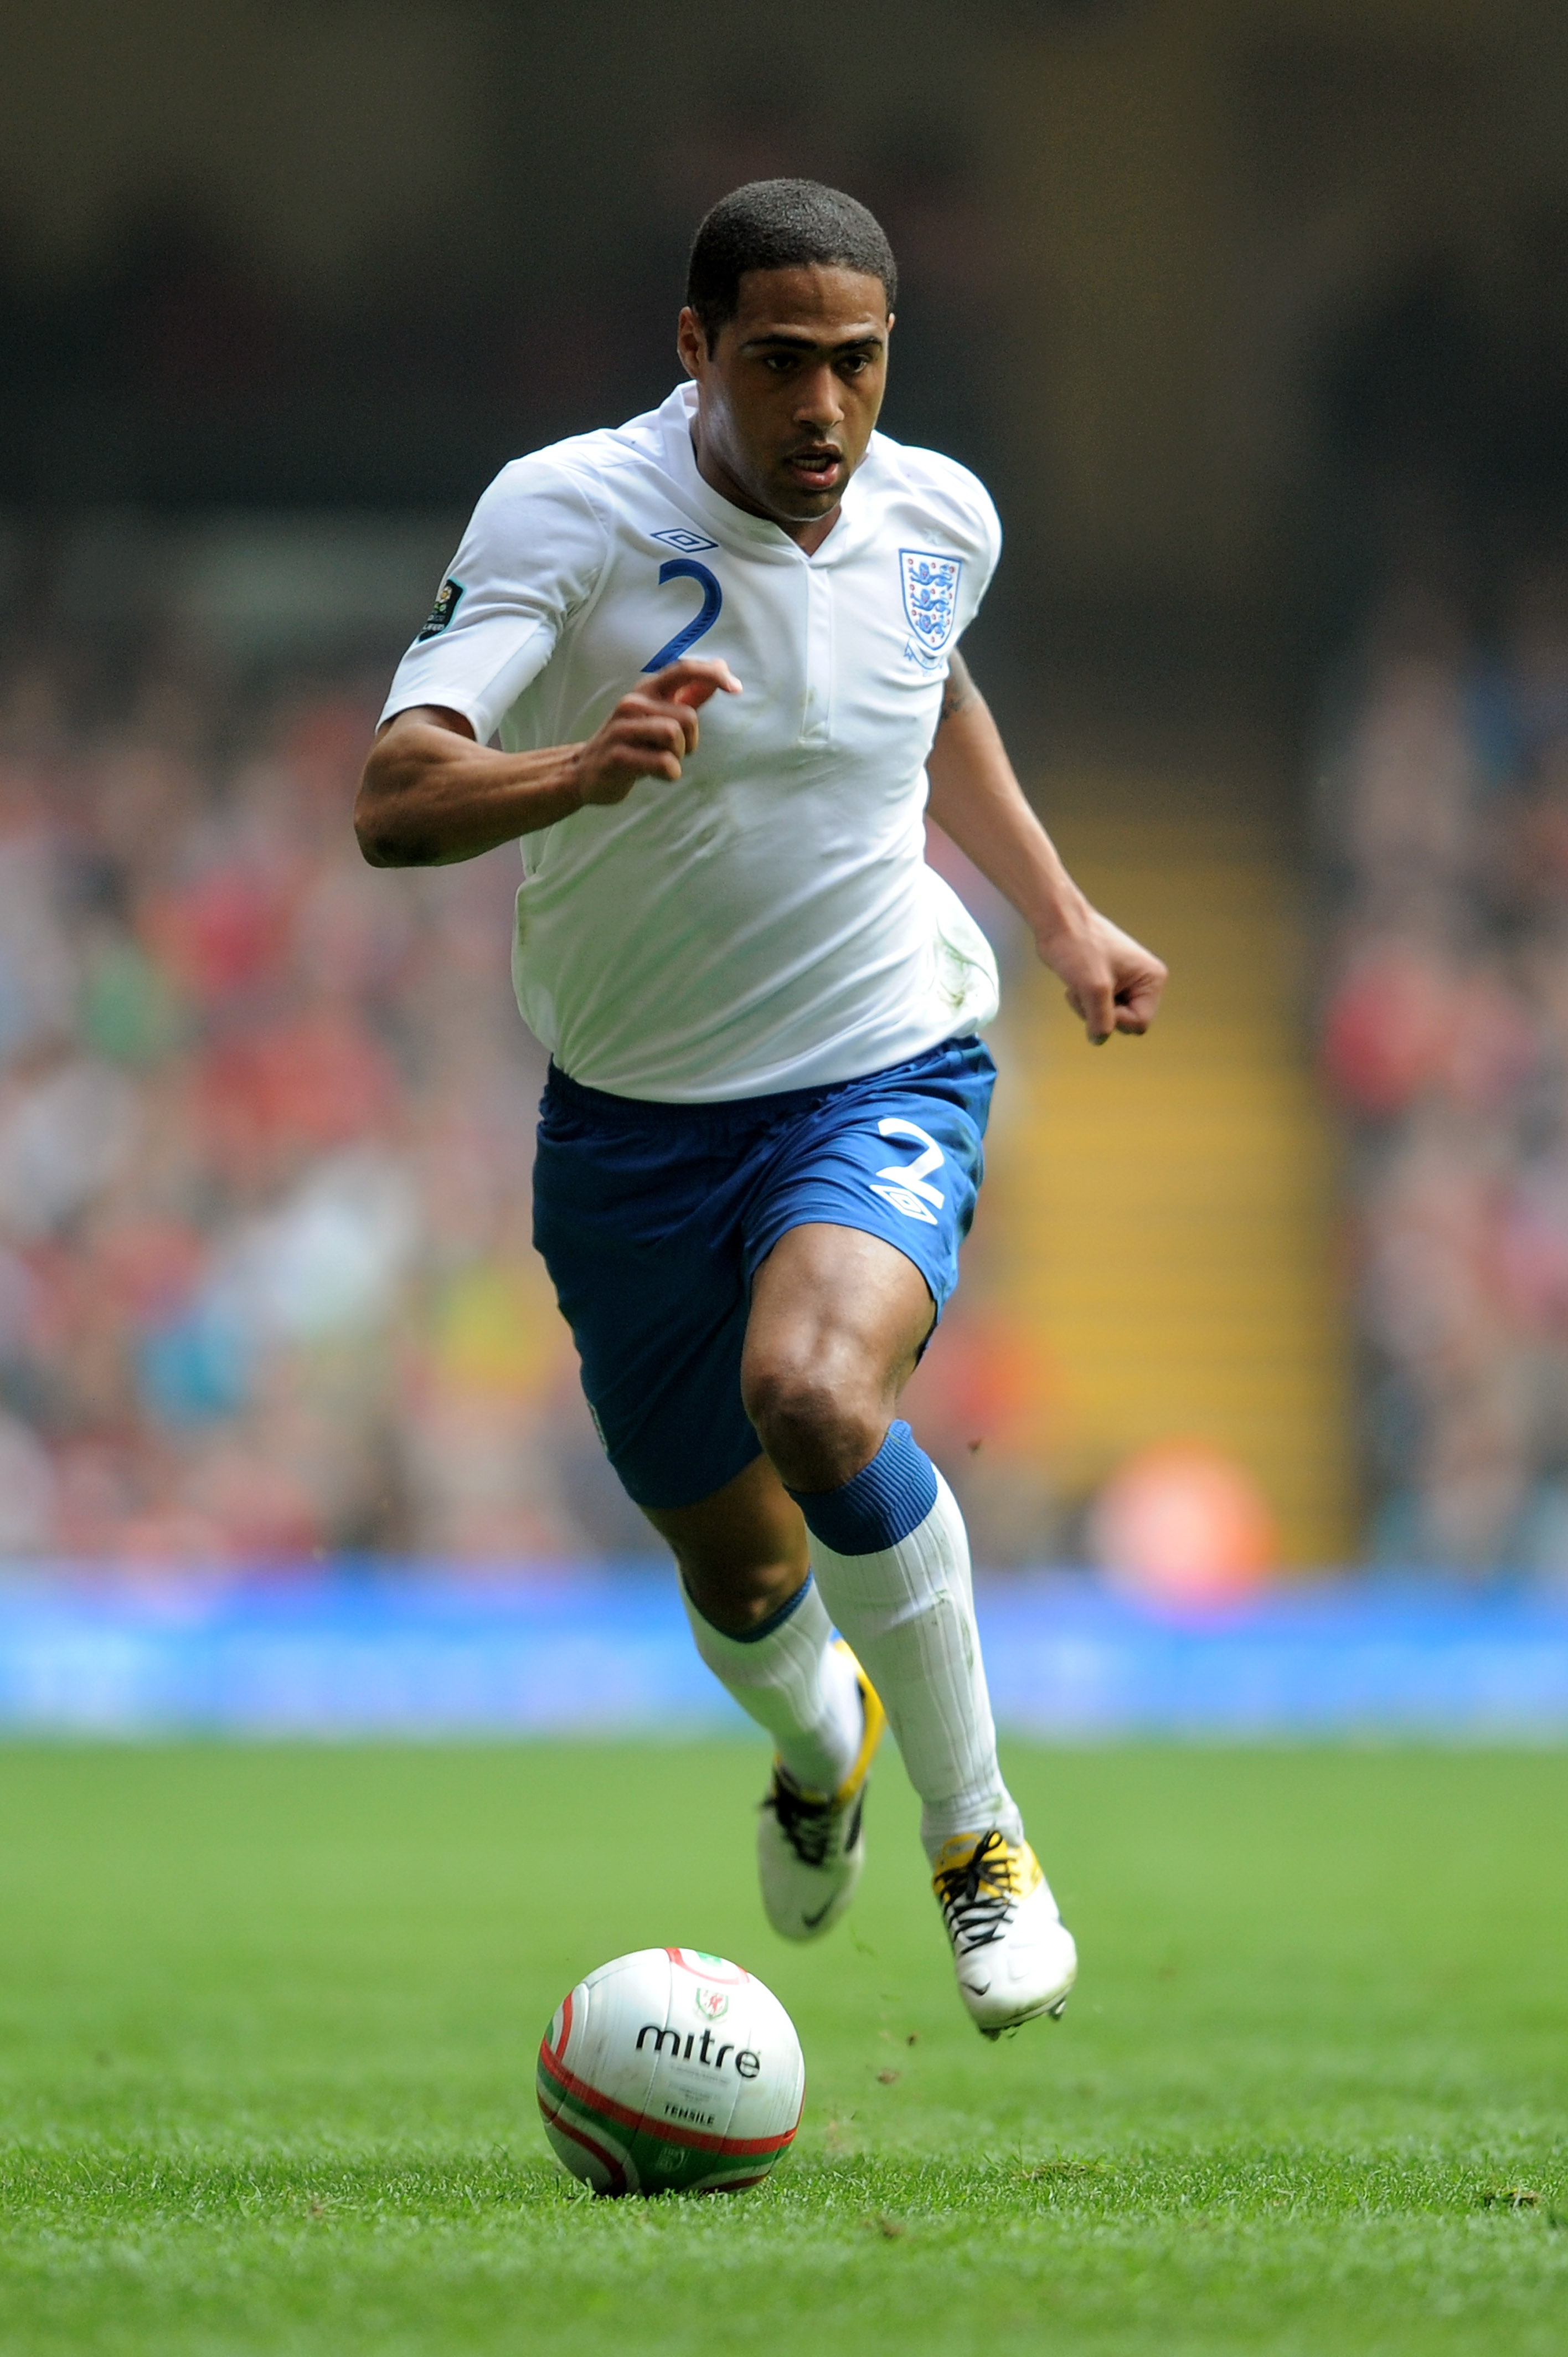 CARDIFF, WALES - MARCH 26:  Glen Johnson of England runs with the ball during the UEFA EURO 2012 Group G qualifying match between Wales and England at the Millennium Stadium on March 26, 2011 in Cardiff, Wales.  (Photo by Michael Regan/Getty Images)